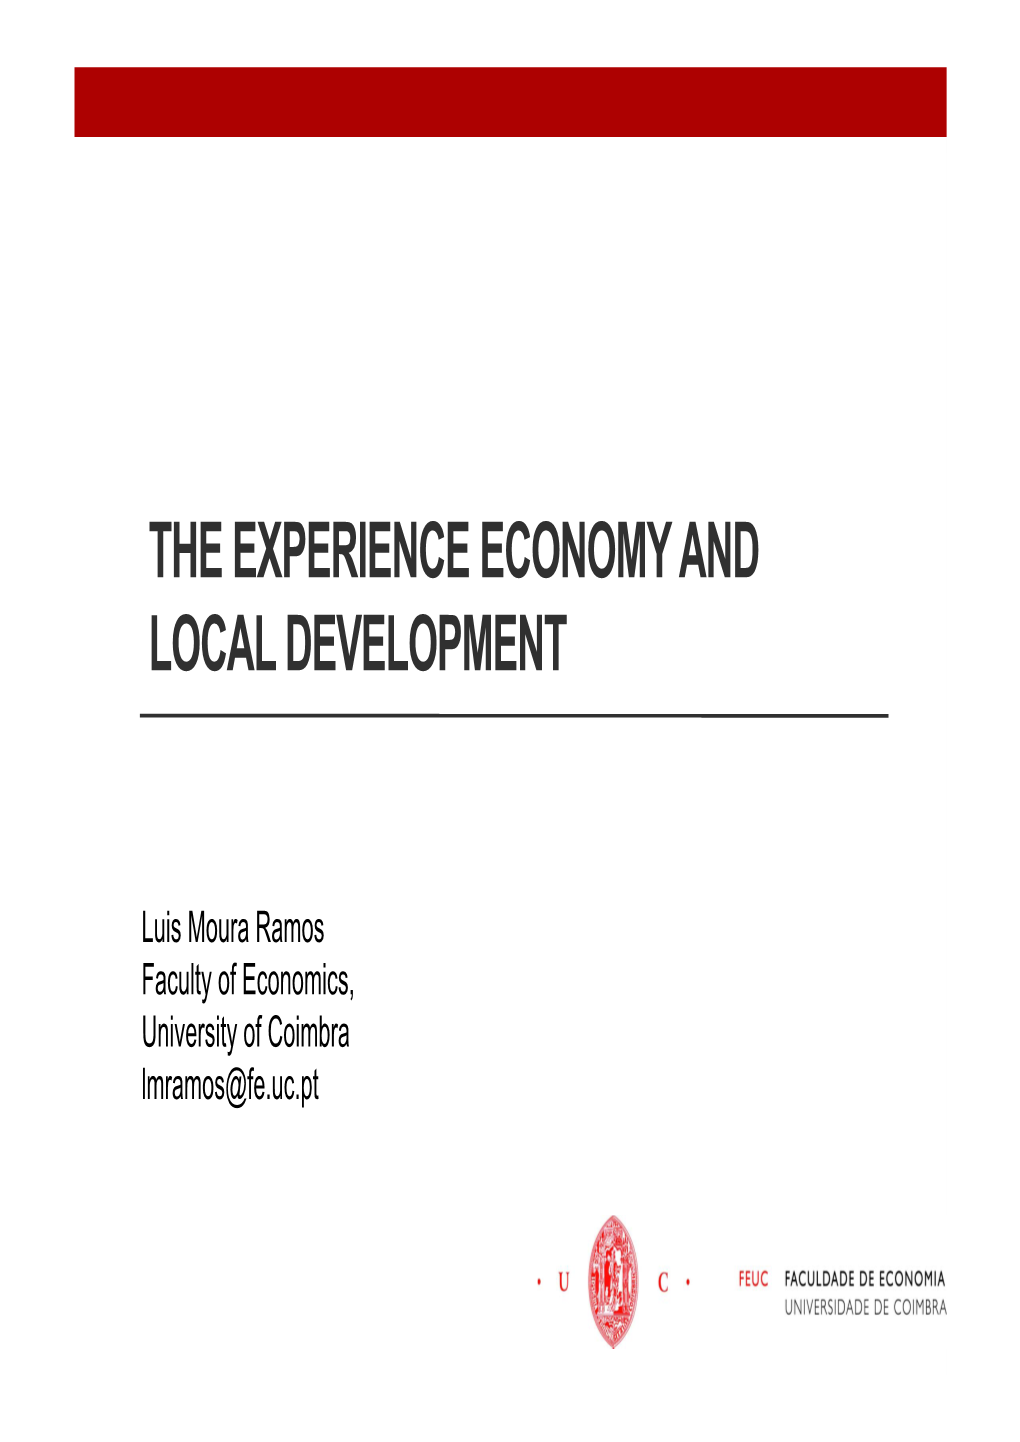 The Experience Economy and Local Development